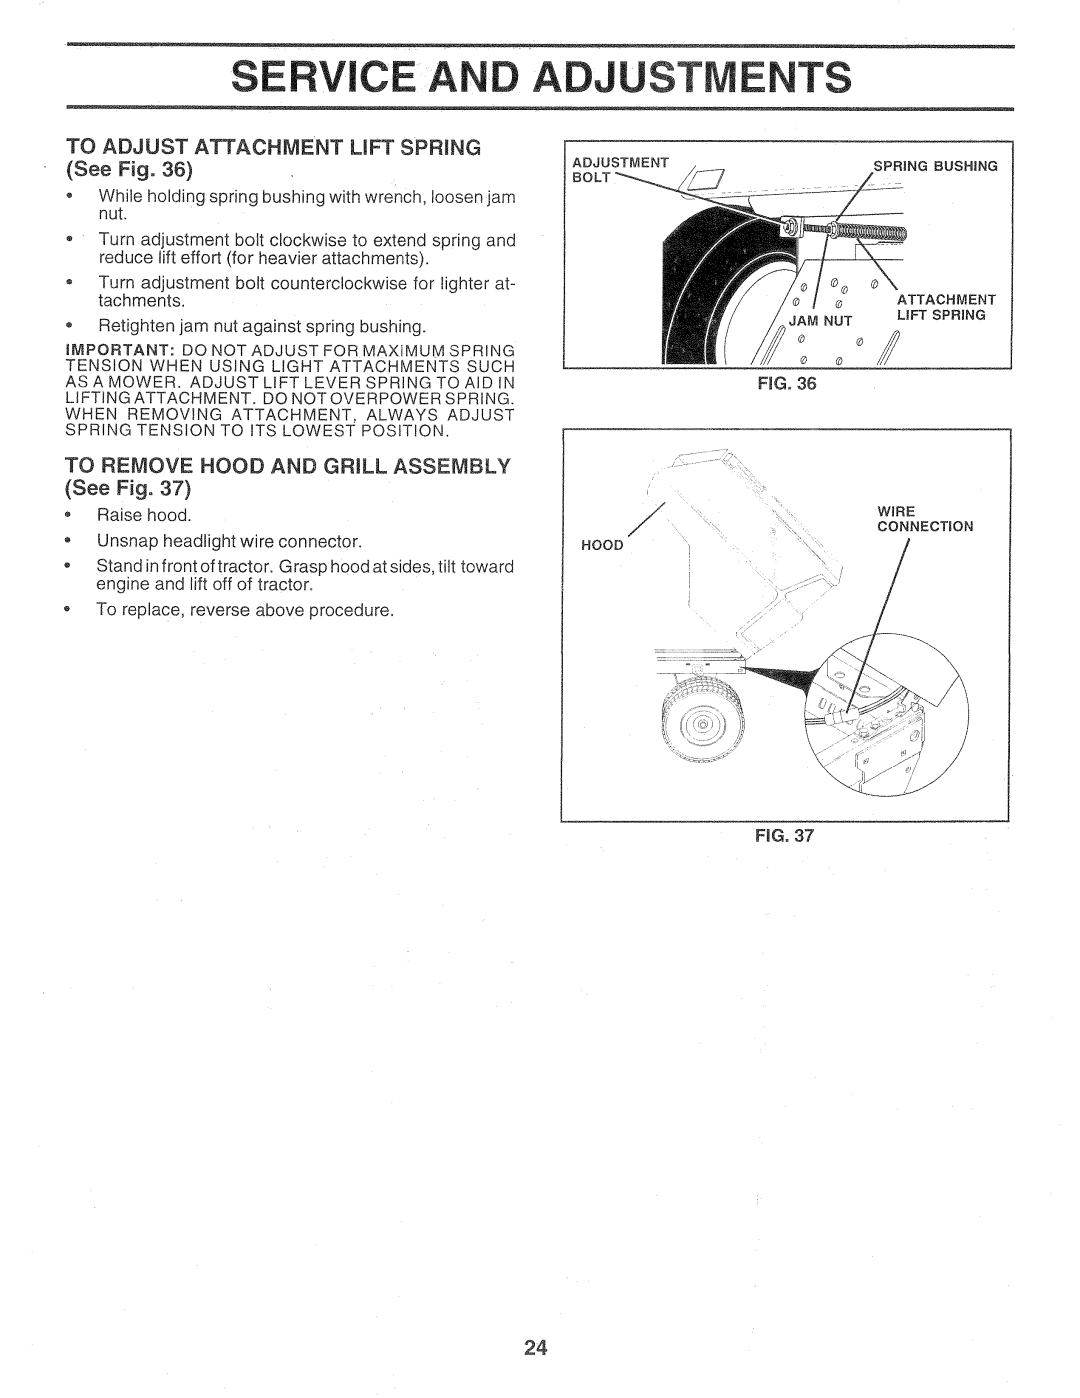 Sears 917.257720 owner manual E Ce And Adjustments, TO ADJUST ATTACHMENT LiFT SPIRING See Fig 